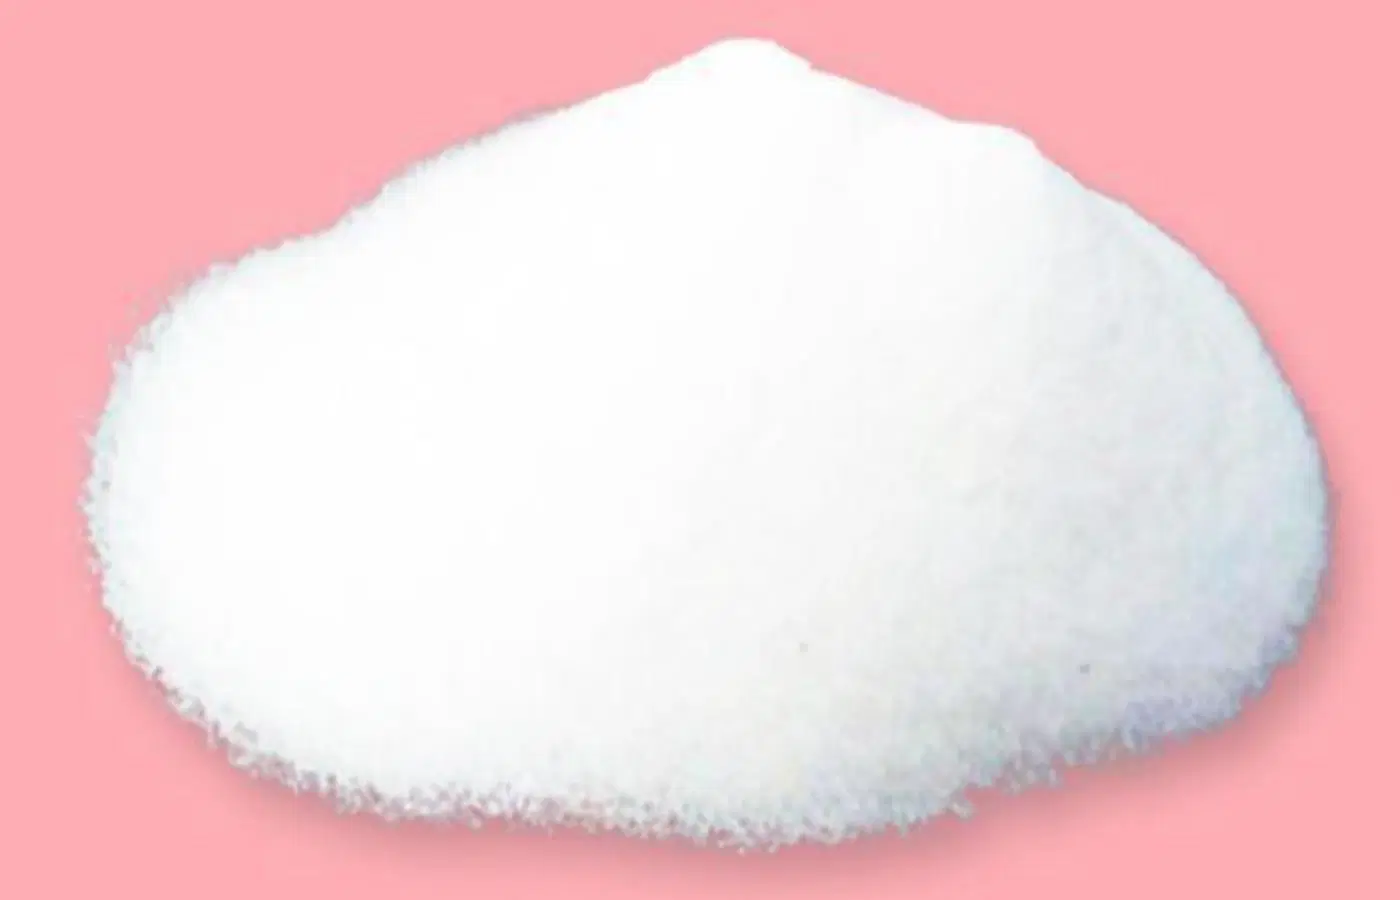 Daily Raw Material Medicine Sucrose-Epichlorohydrin Copolymer Purity Degree 99% CAS No. 26873-85-8